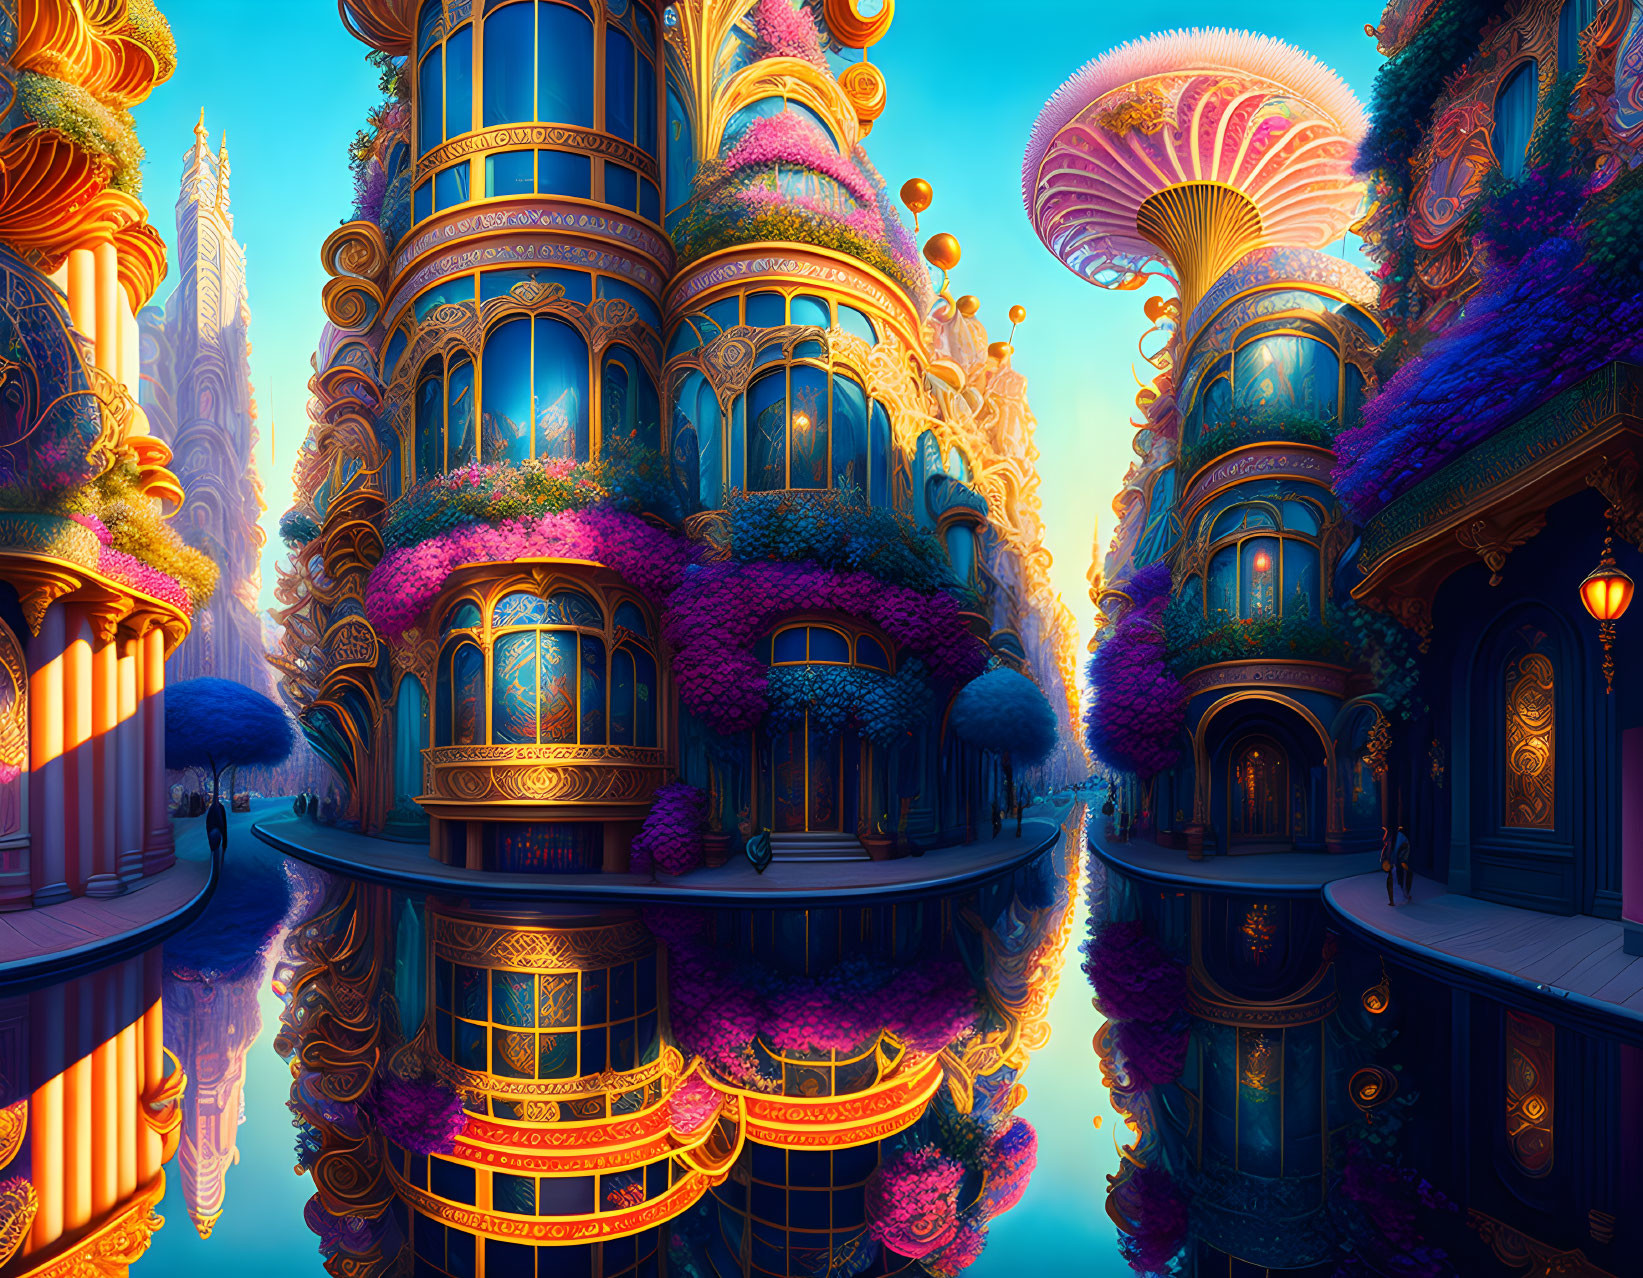 Fantastical cityscape with golden-trimmed buildings and mushroom-like structures reflected in water